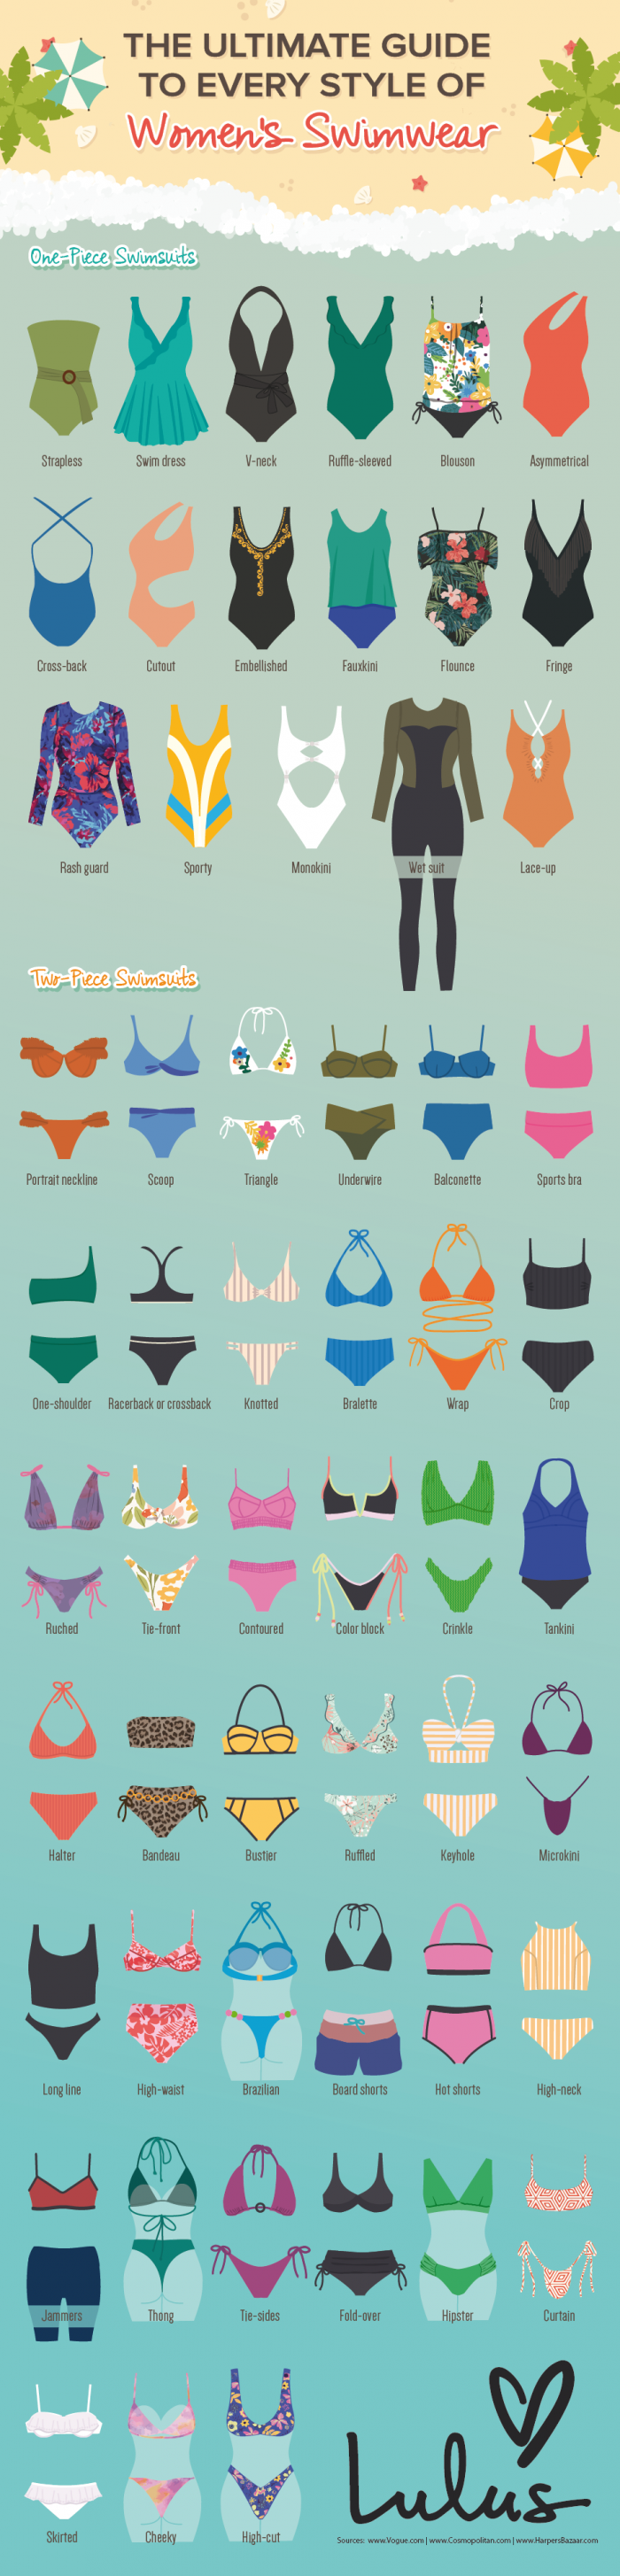 the ultimate guide to every style of women's swimwear